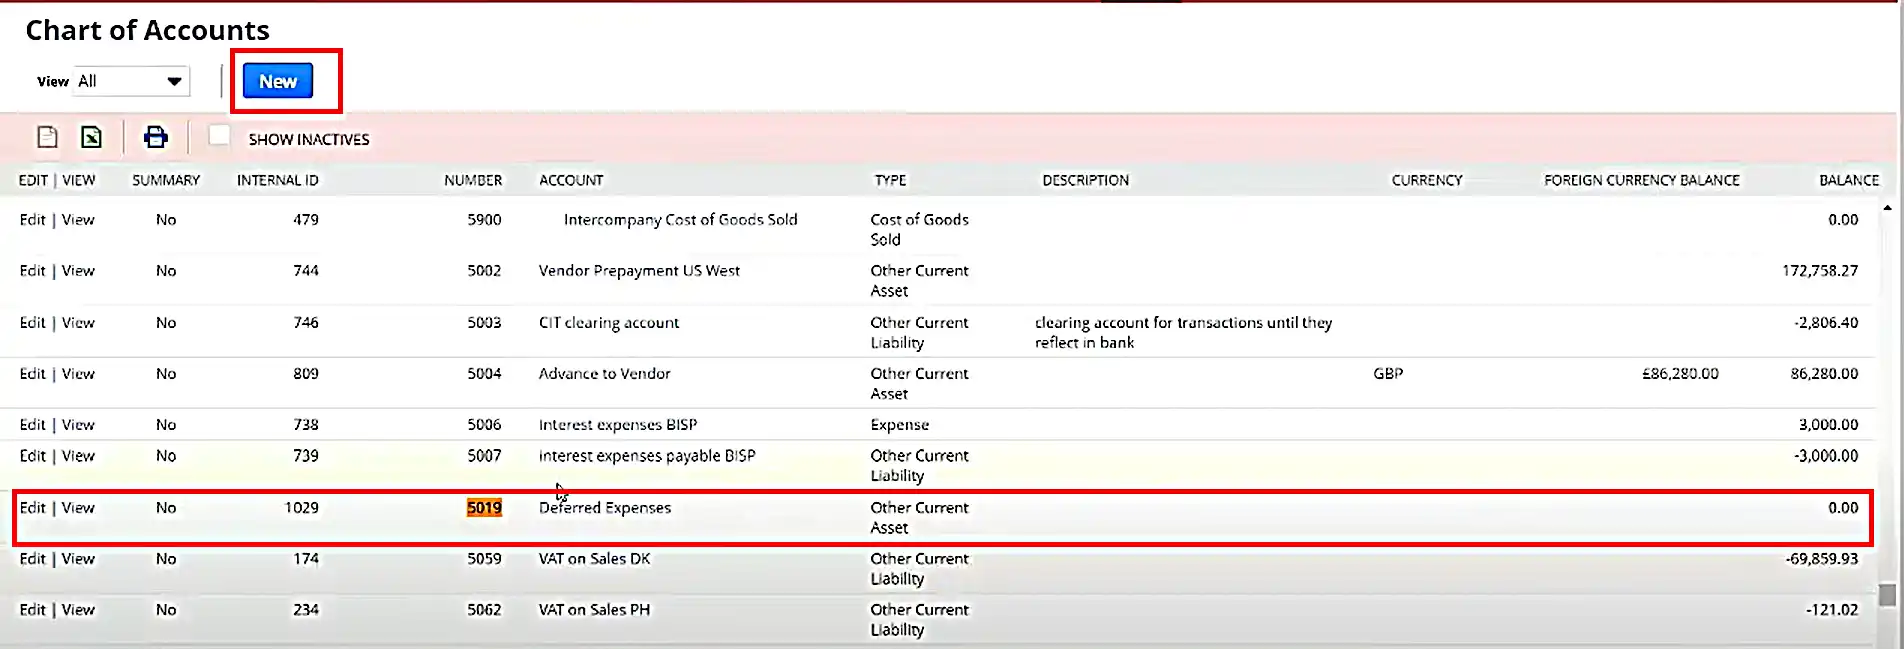 Then, click on “New” to create a separate account in “Chart of Accounts” to track deferring expenses.